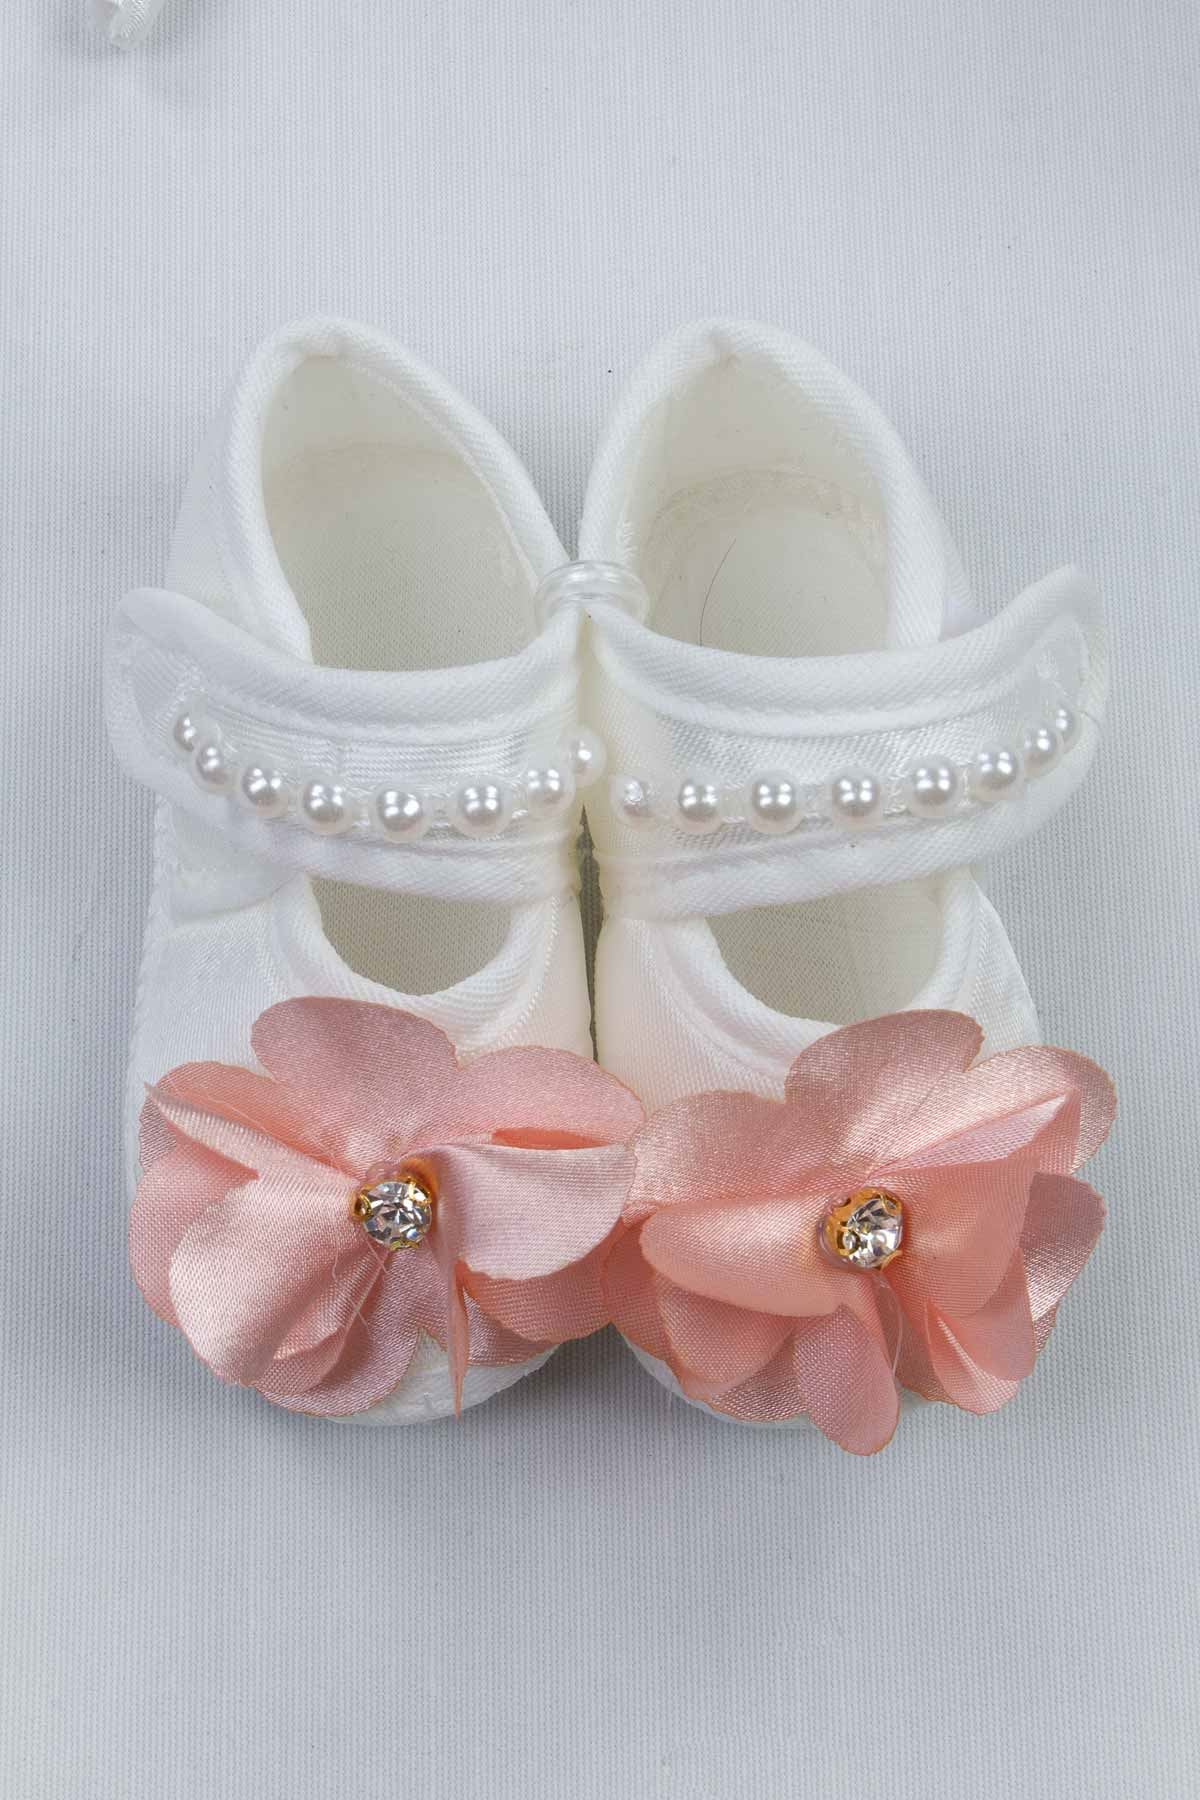 White Puerperal Crown Slippers and Baby Booties Bandana Set